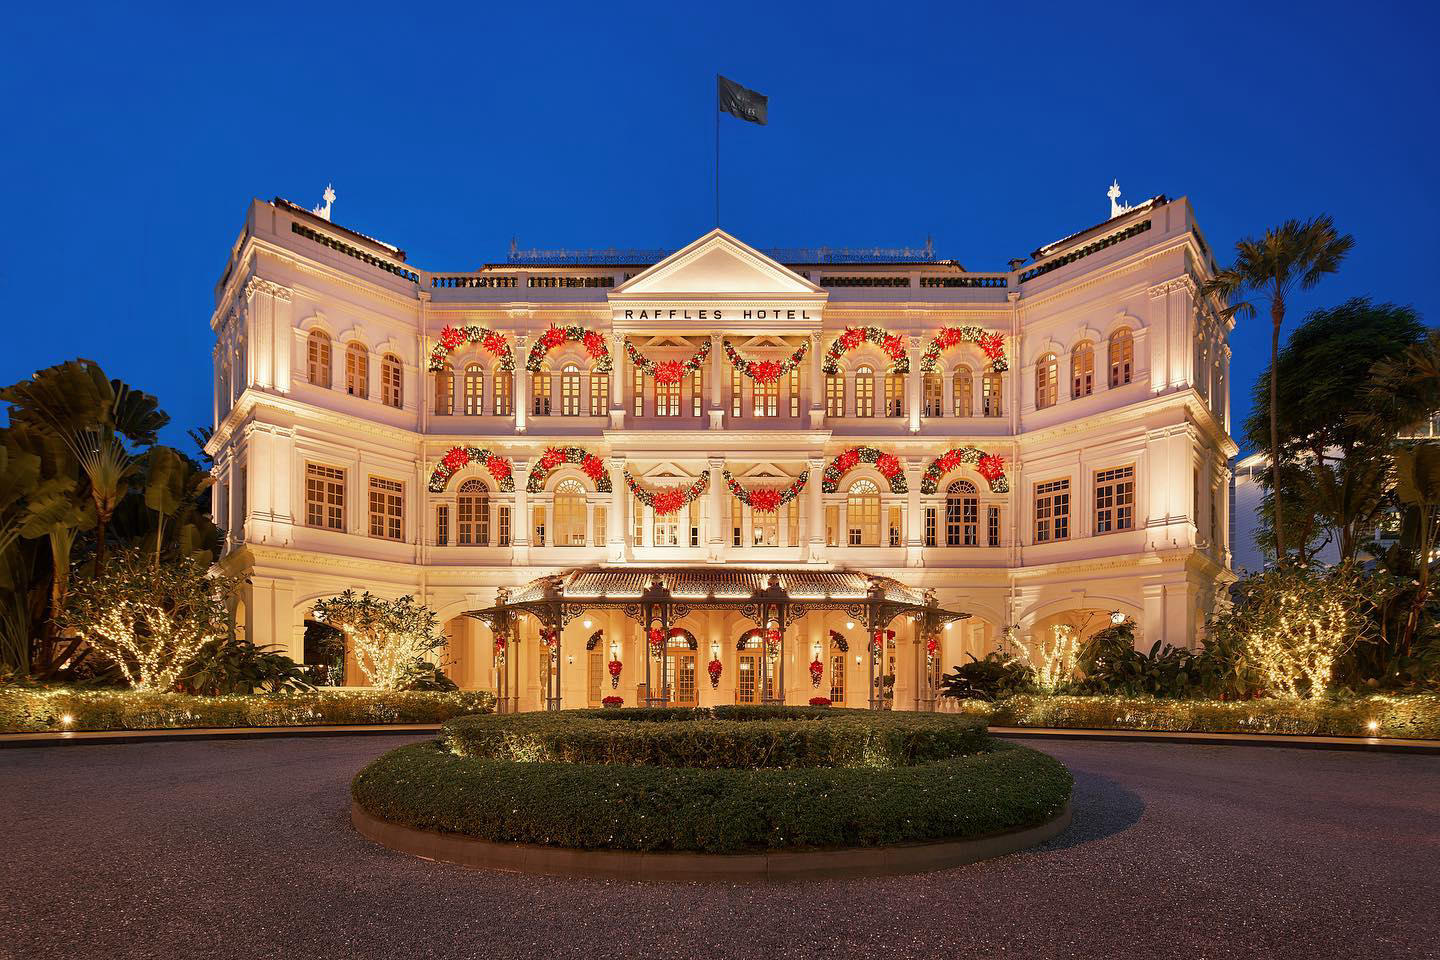 Raffles Hotel Singapore - Merry Christmas from all of us at Raffles Singapore